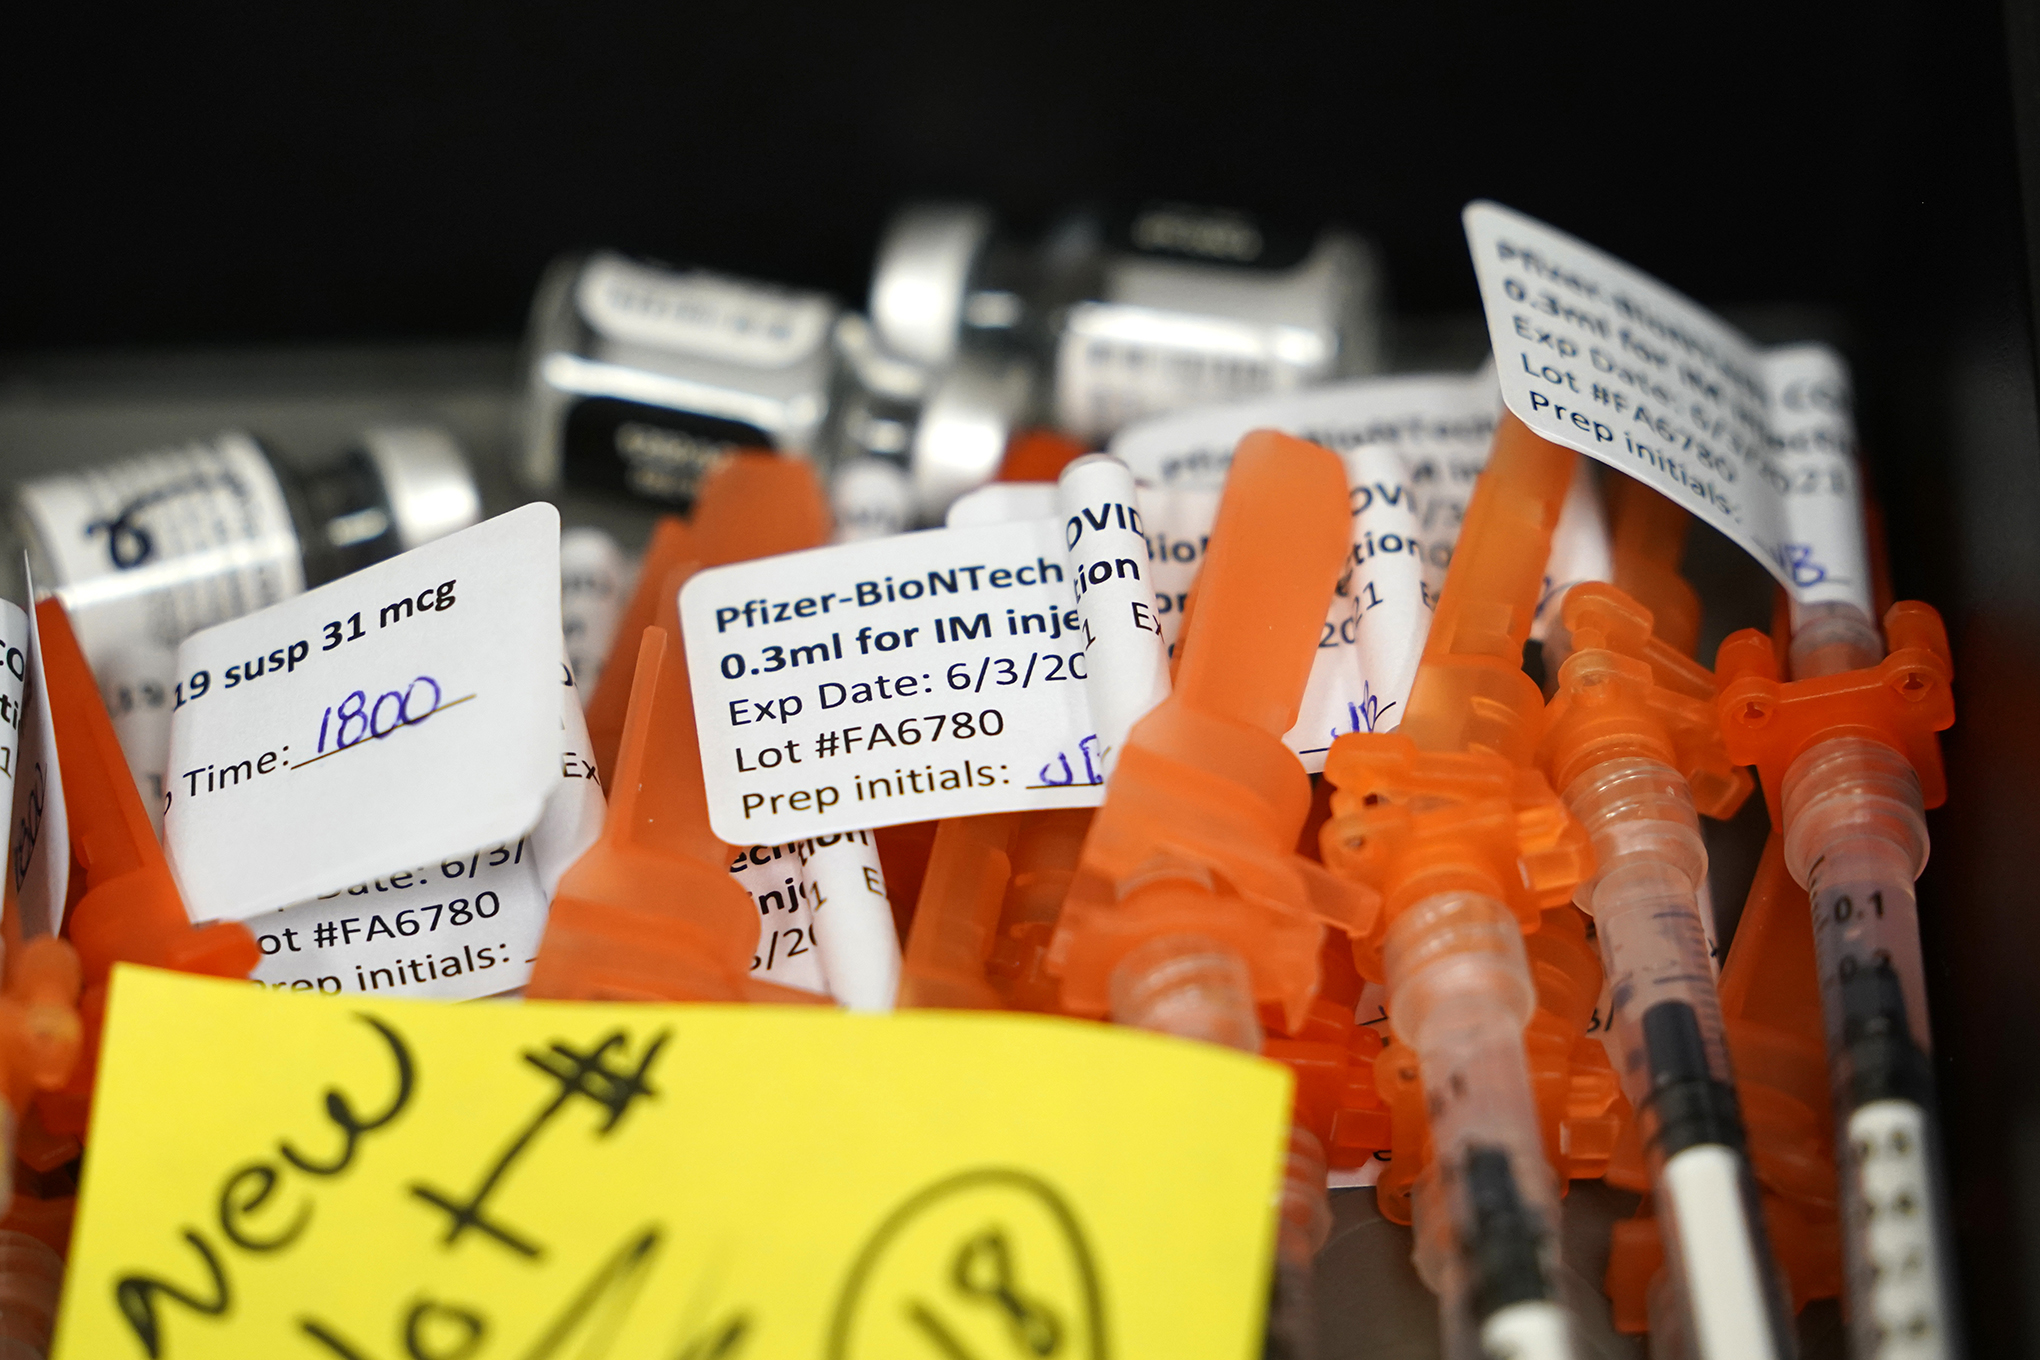 Syringes filled with Pfizer COVID-19 vaccines sit at the ready at a vaccination clinic.